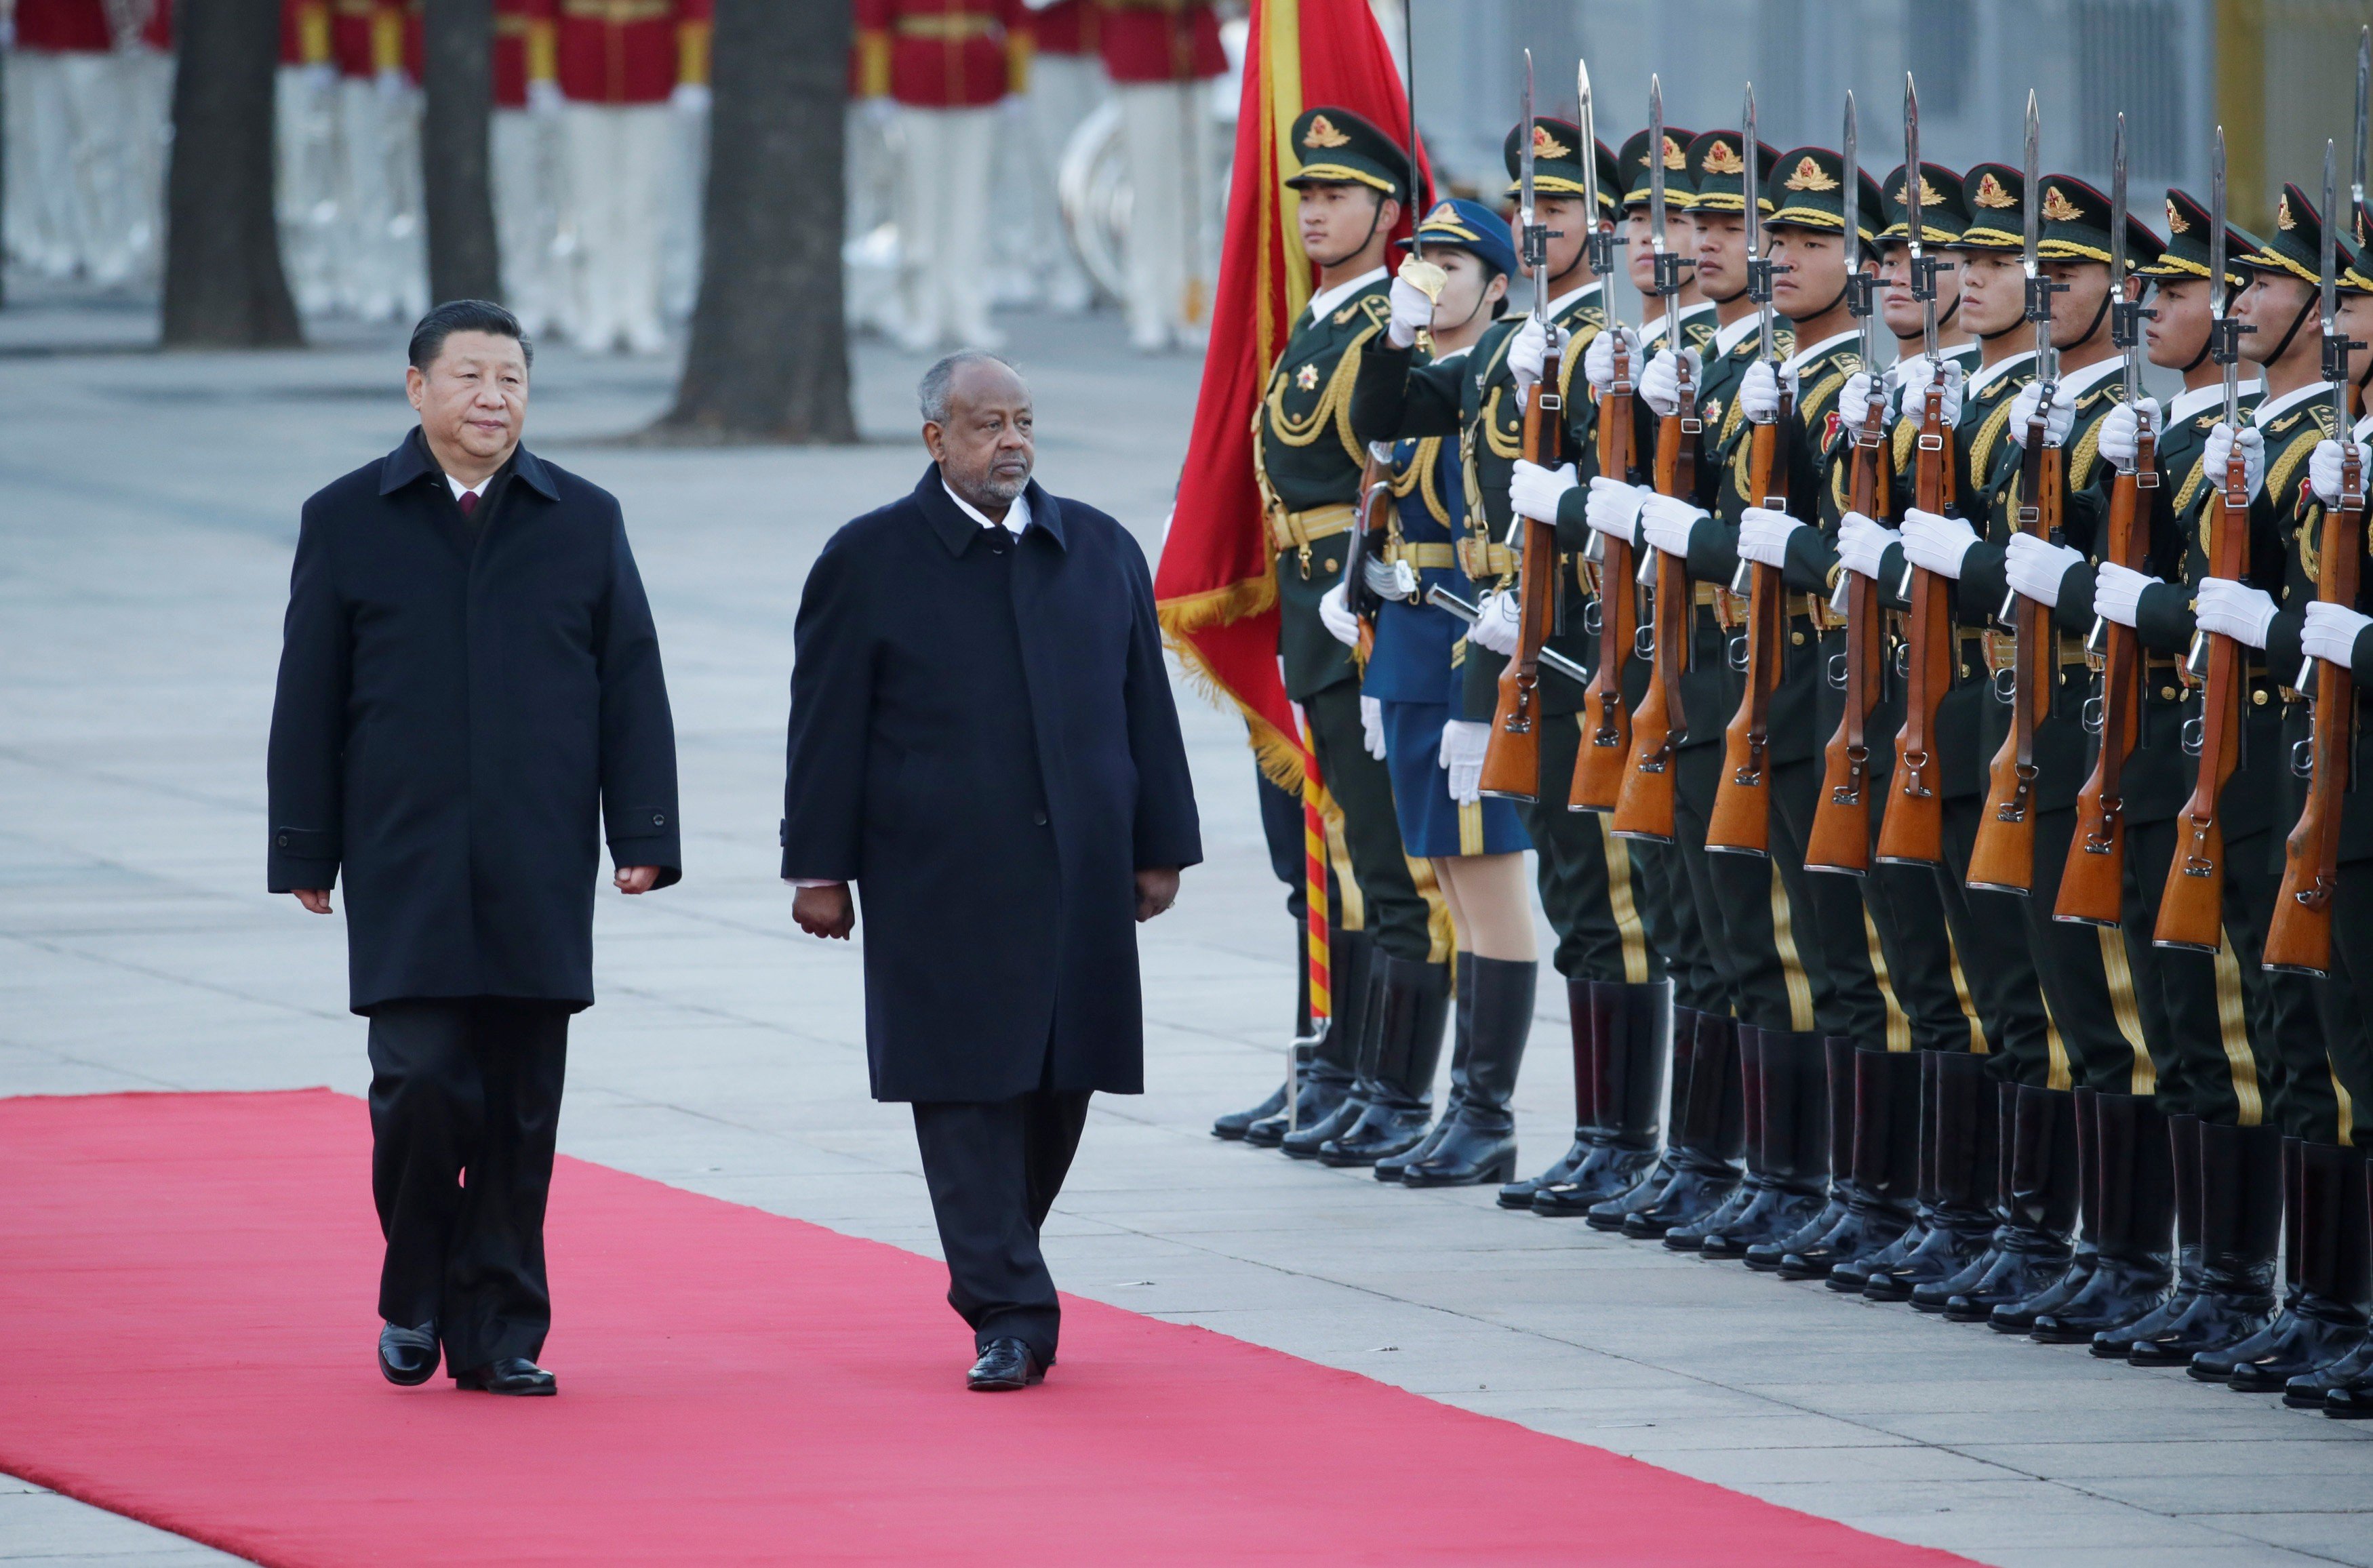 President Xi Jinping and Djibouti's President Ismail Omar Guelleh in Beijing in November. Photo: Reuters